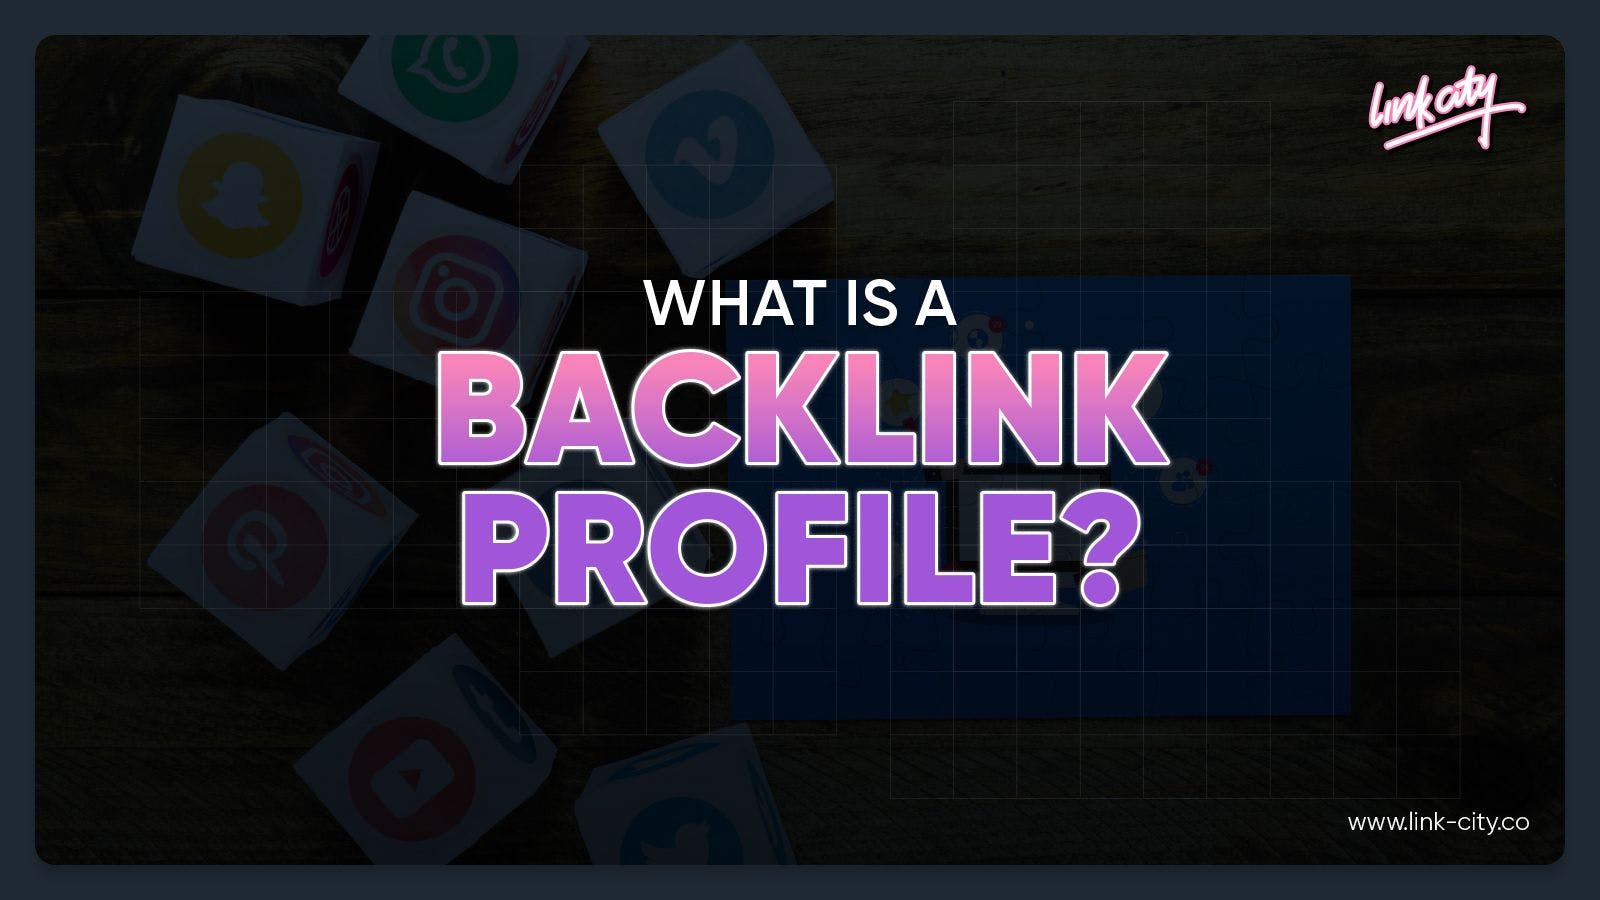 What is a Backlink Profile?